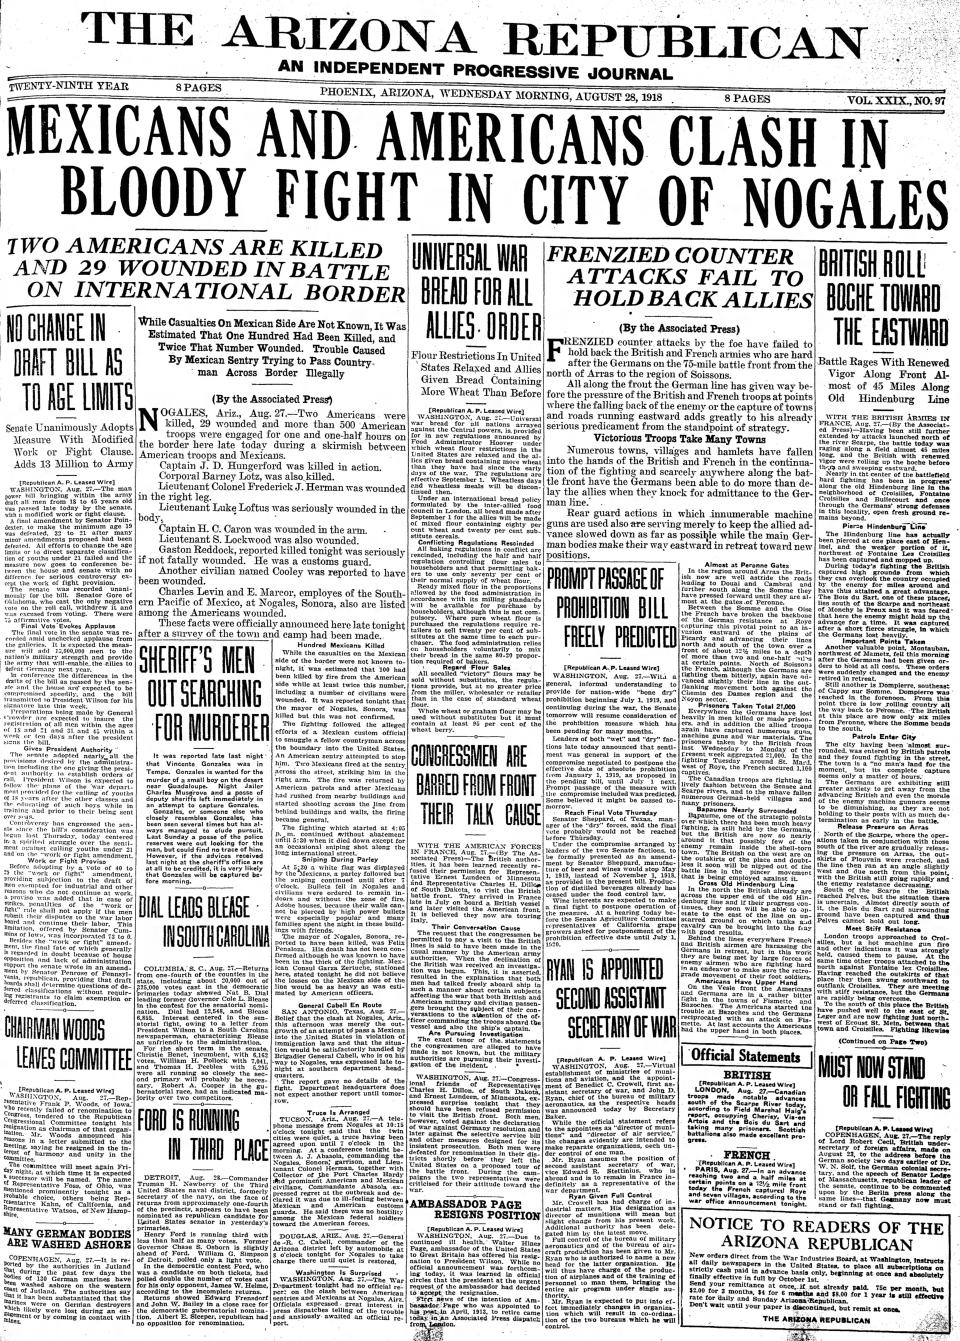 On Aug. 28, 1918, The Arizona Republican, as this news outlet was then called, published a report about what became know as the Battle of Ambos Nogales.